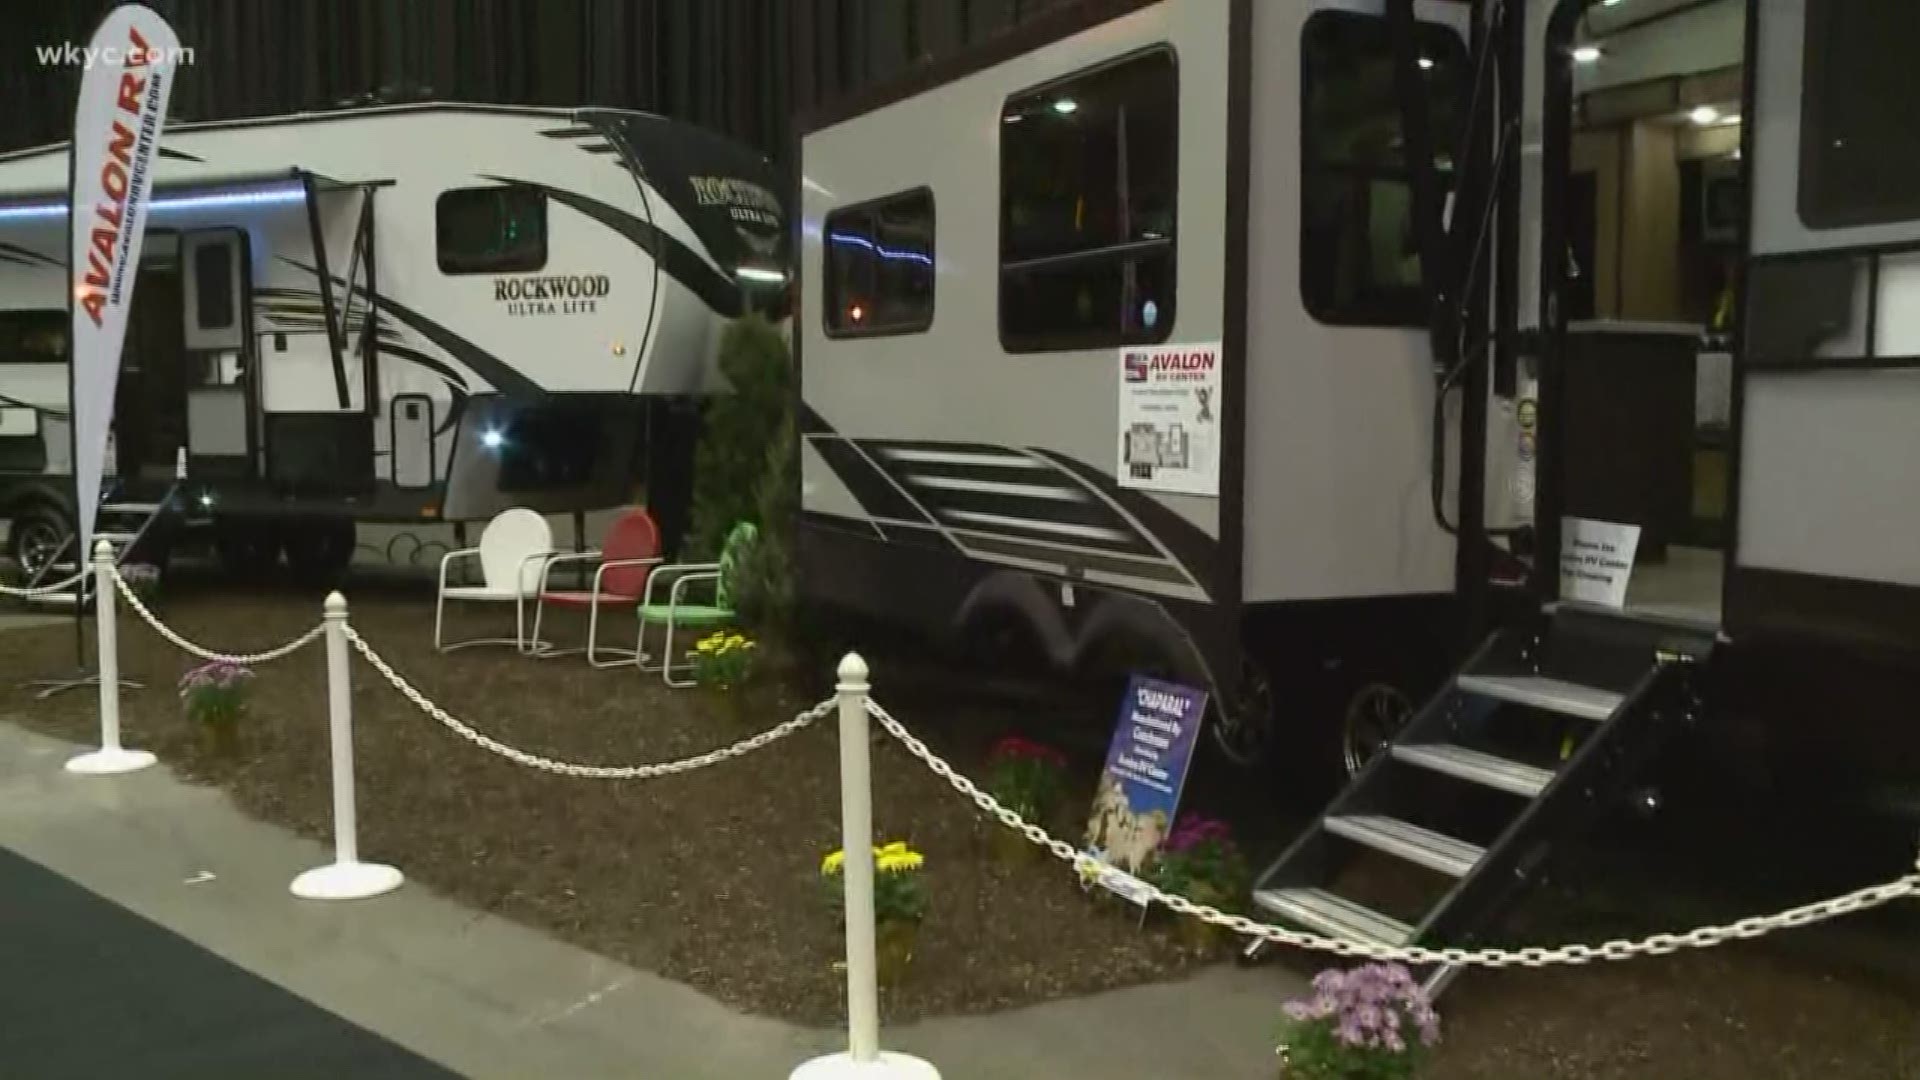 Annual RV Supershow Getting Us In Spring Mood- America's Largest Indoor Recreational Vehicle Show.